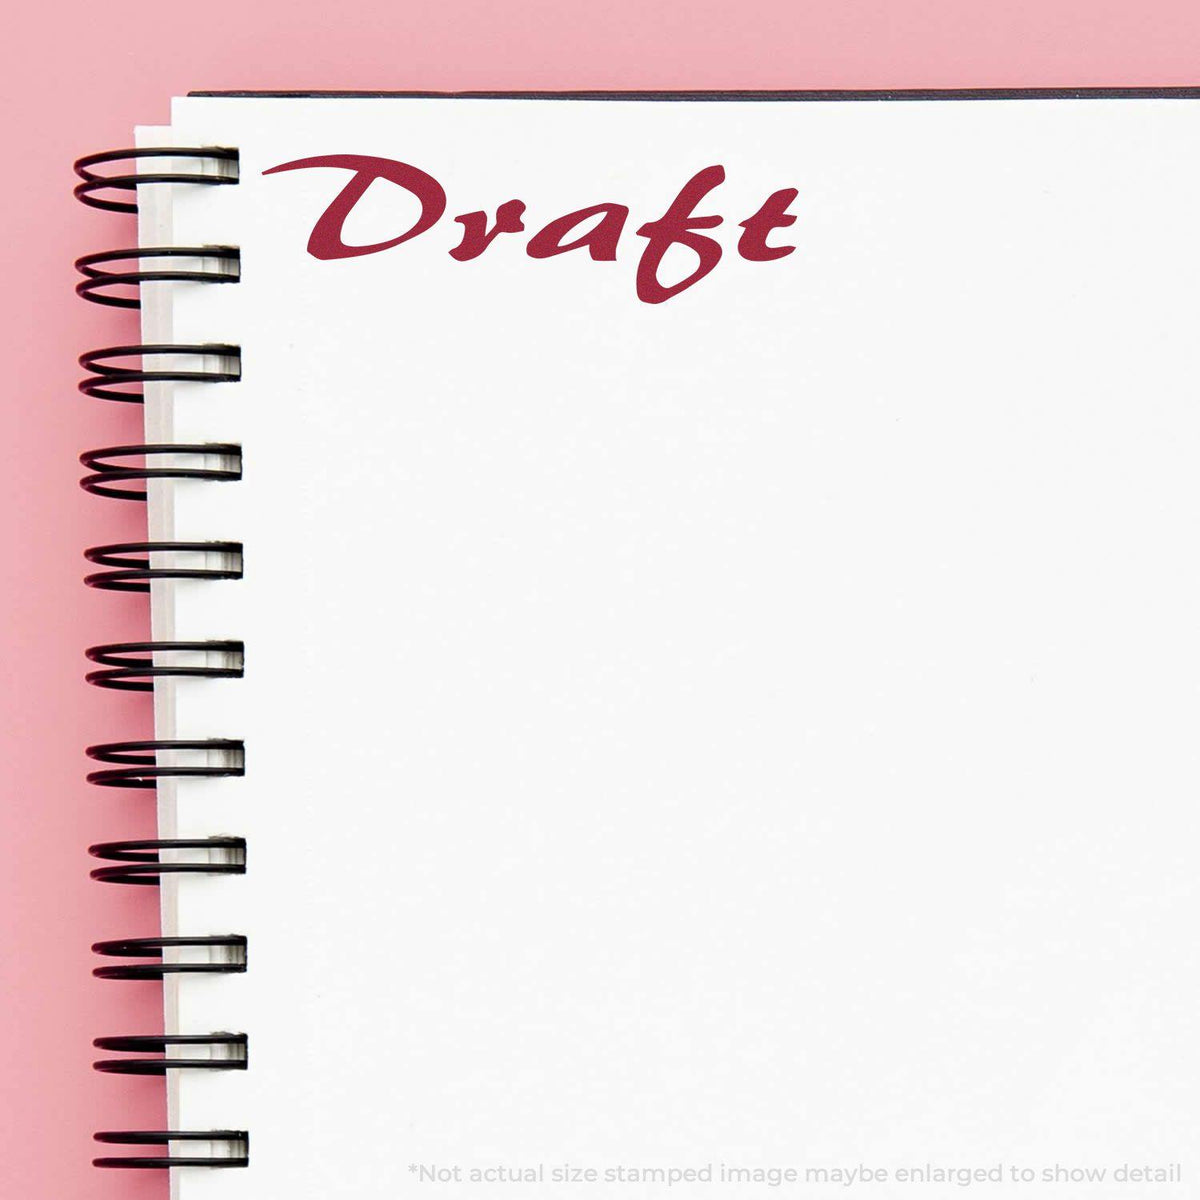 In Use Cursive Draft Rubber Stamp Image